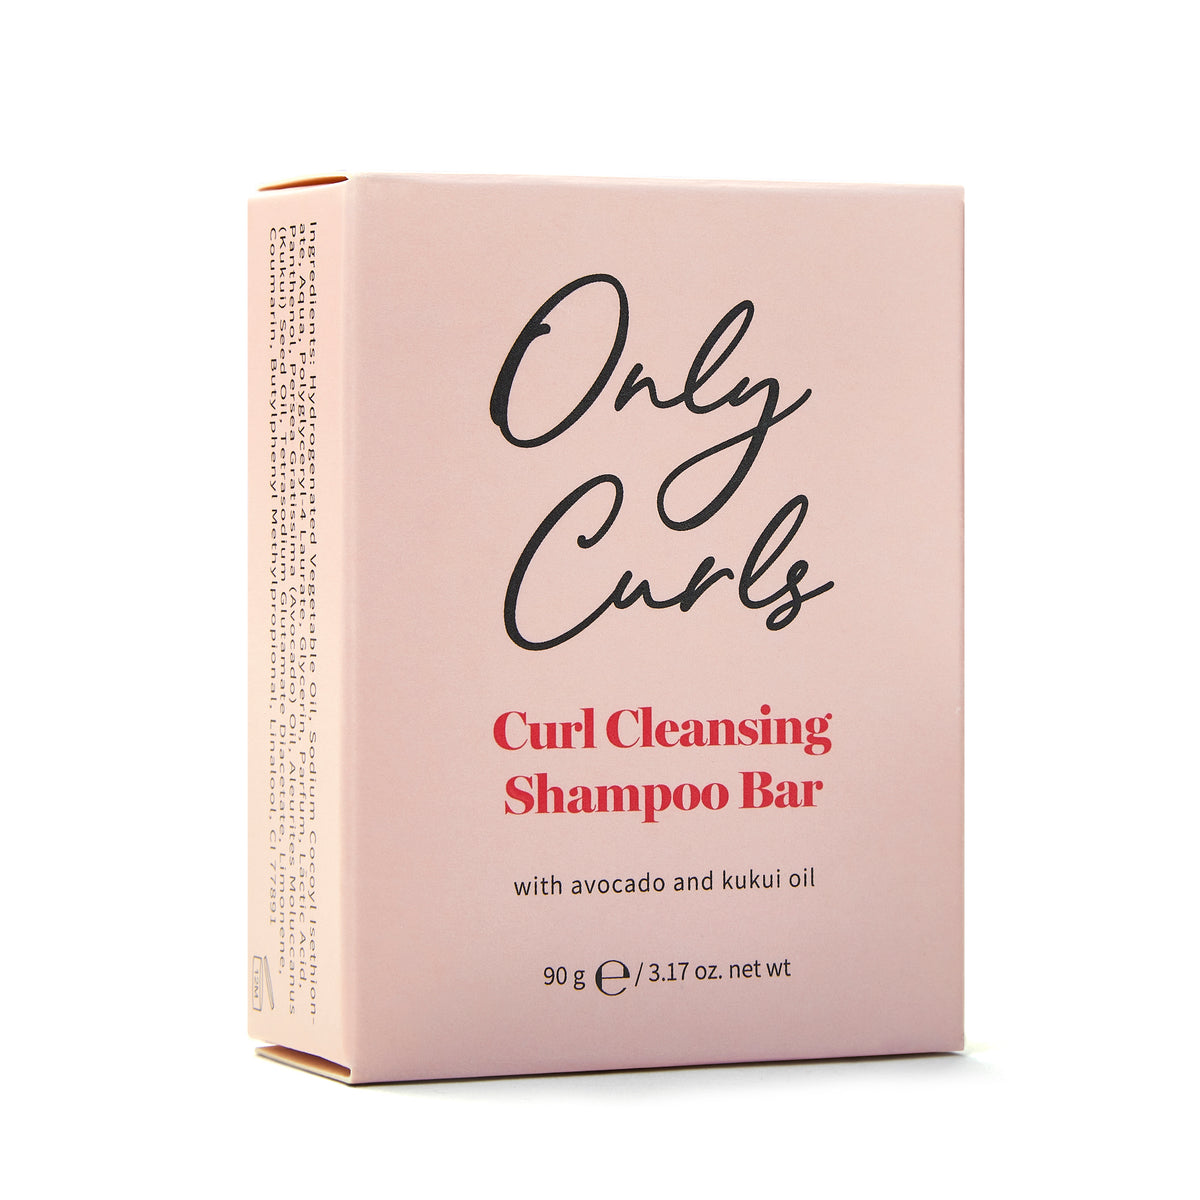 Curl Cleansing Shampoo Bar - Only Curls